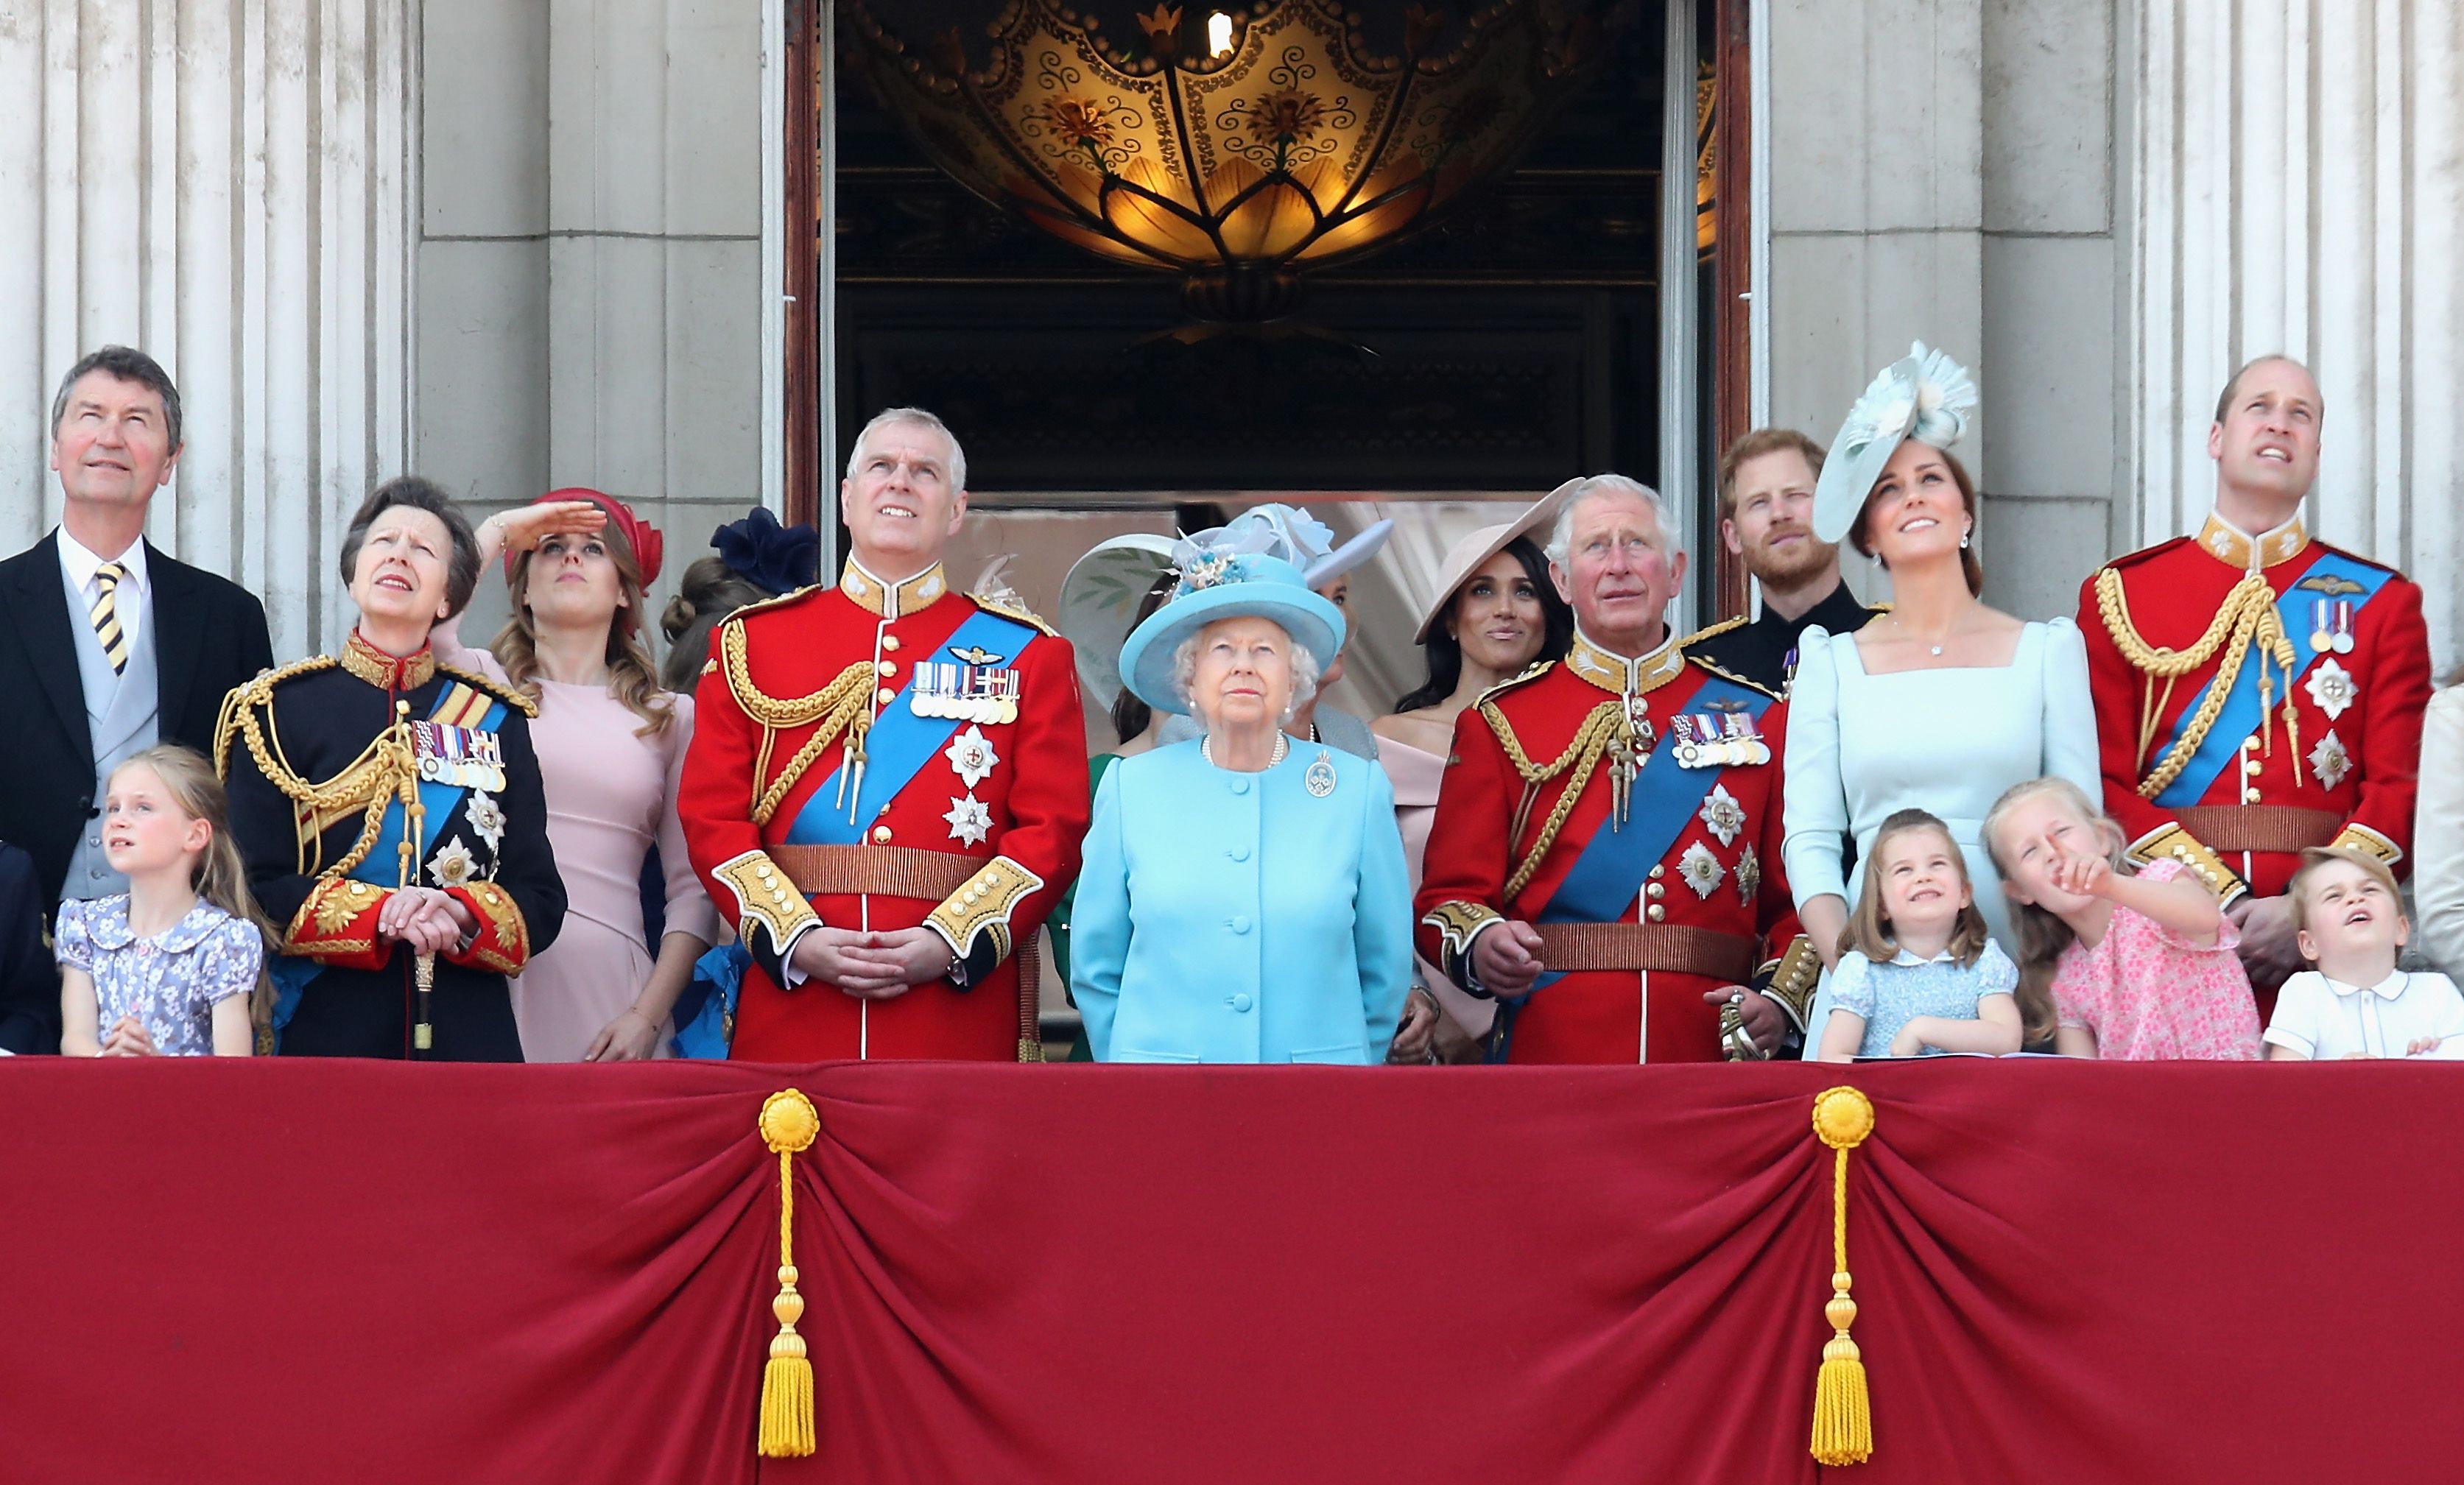 The Royal Family watches the flypast during Trooping The Colour event on June 9, 2018, in London, England. | Source: Chris Jackson/Getty Images